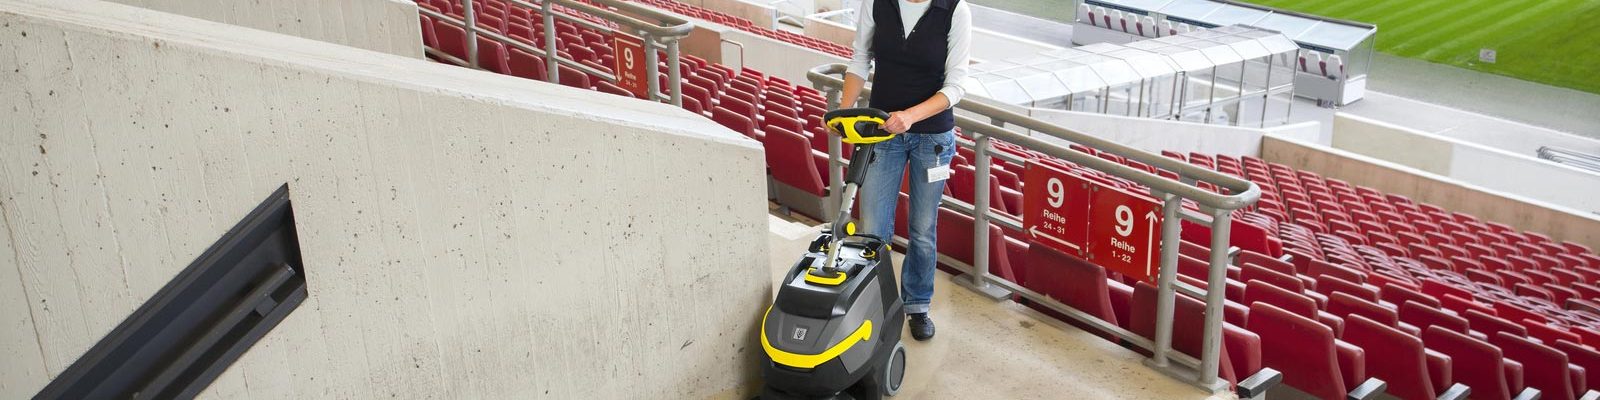 Scrubber dryer cleaning a football stadium